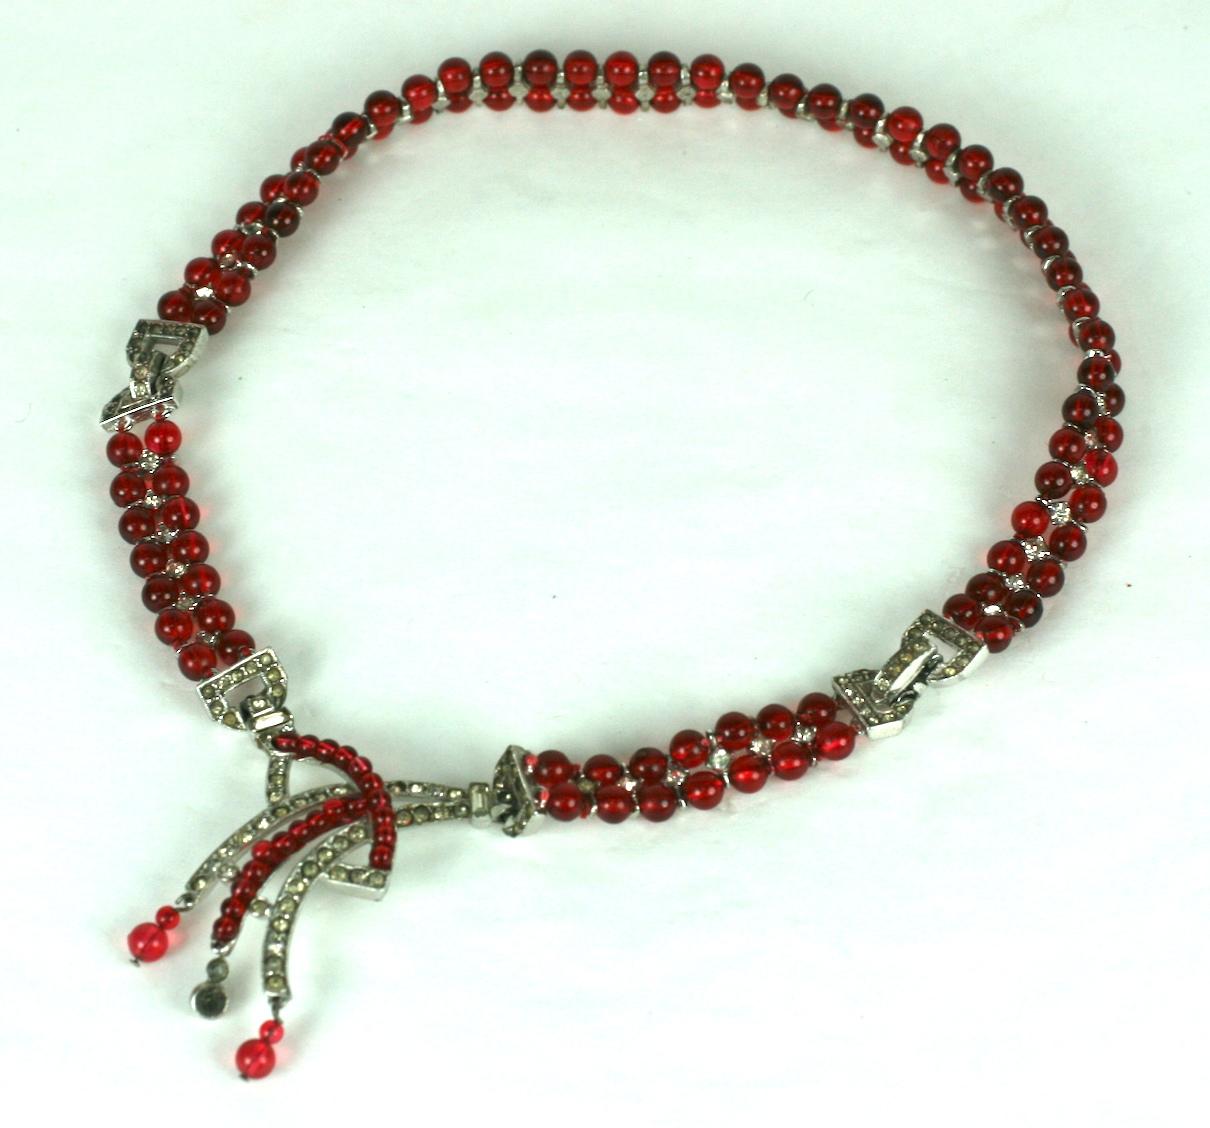 Fine Ciner art deco necklace composed of two strands of articulated faux ruby beads with crystal rhinestone pave spacers and clasp. Center focal pendant of hand wired ruby beads and and crystal pave.
Excellent Condition, Signed Ciner.
Length